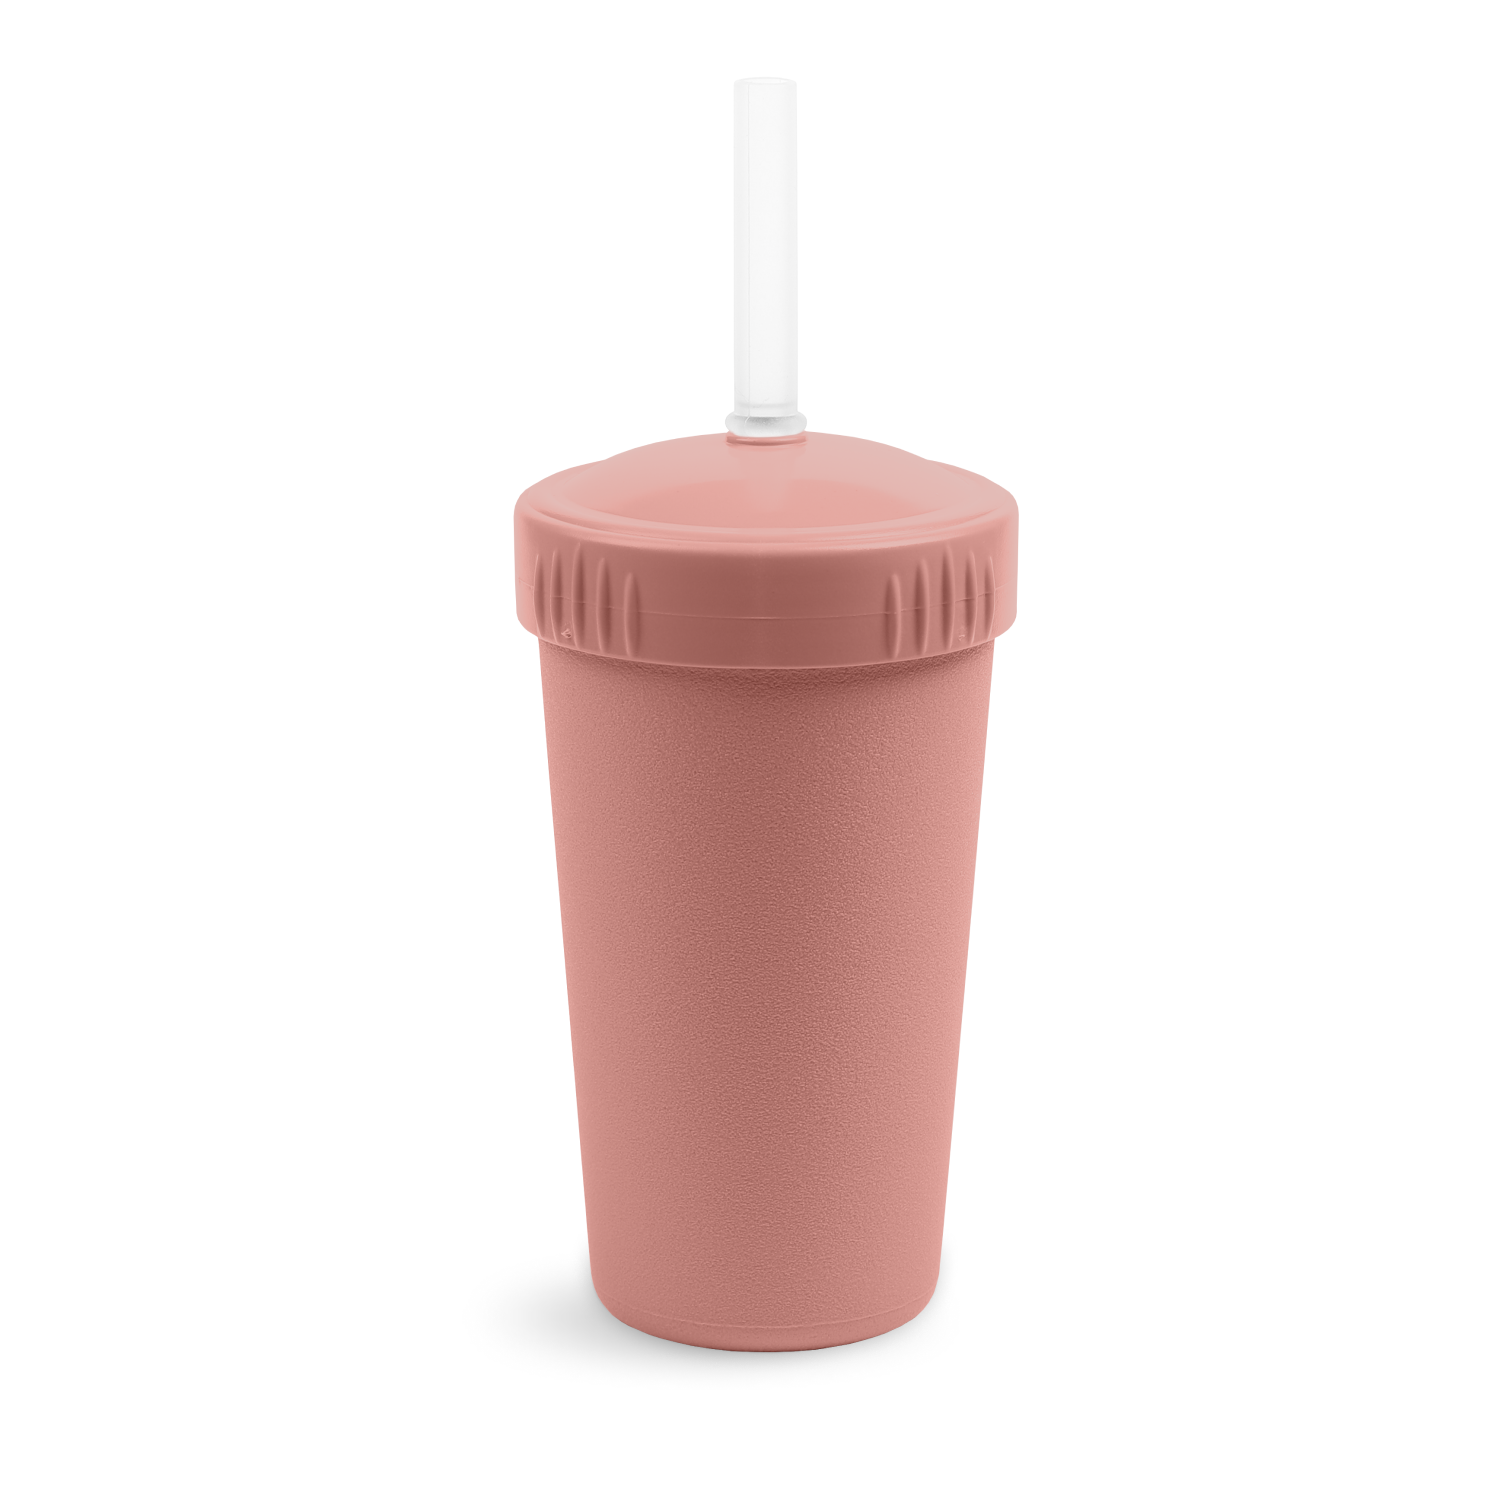 Straw Cups